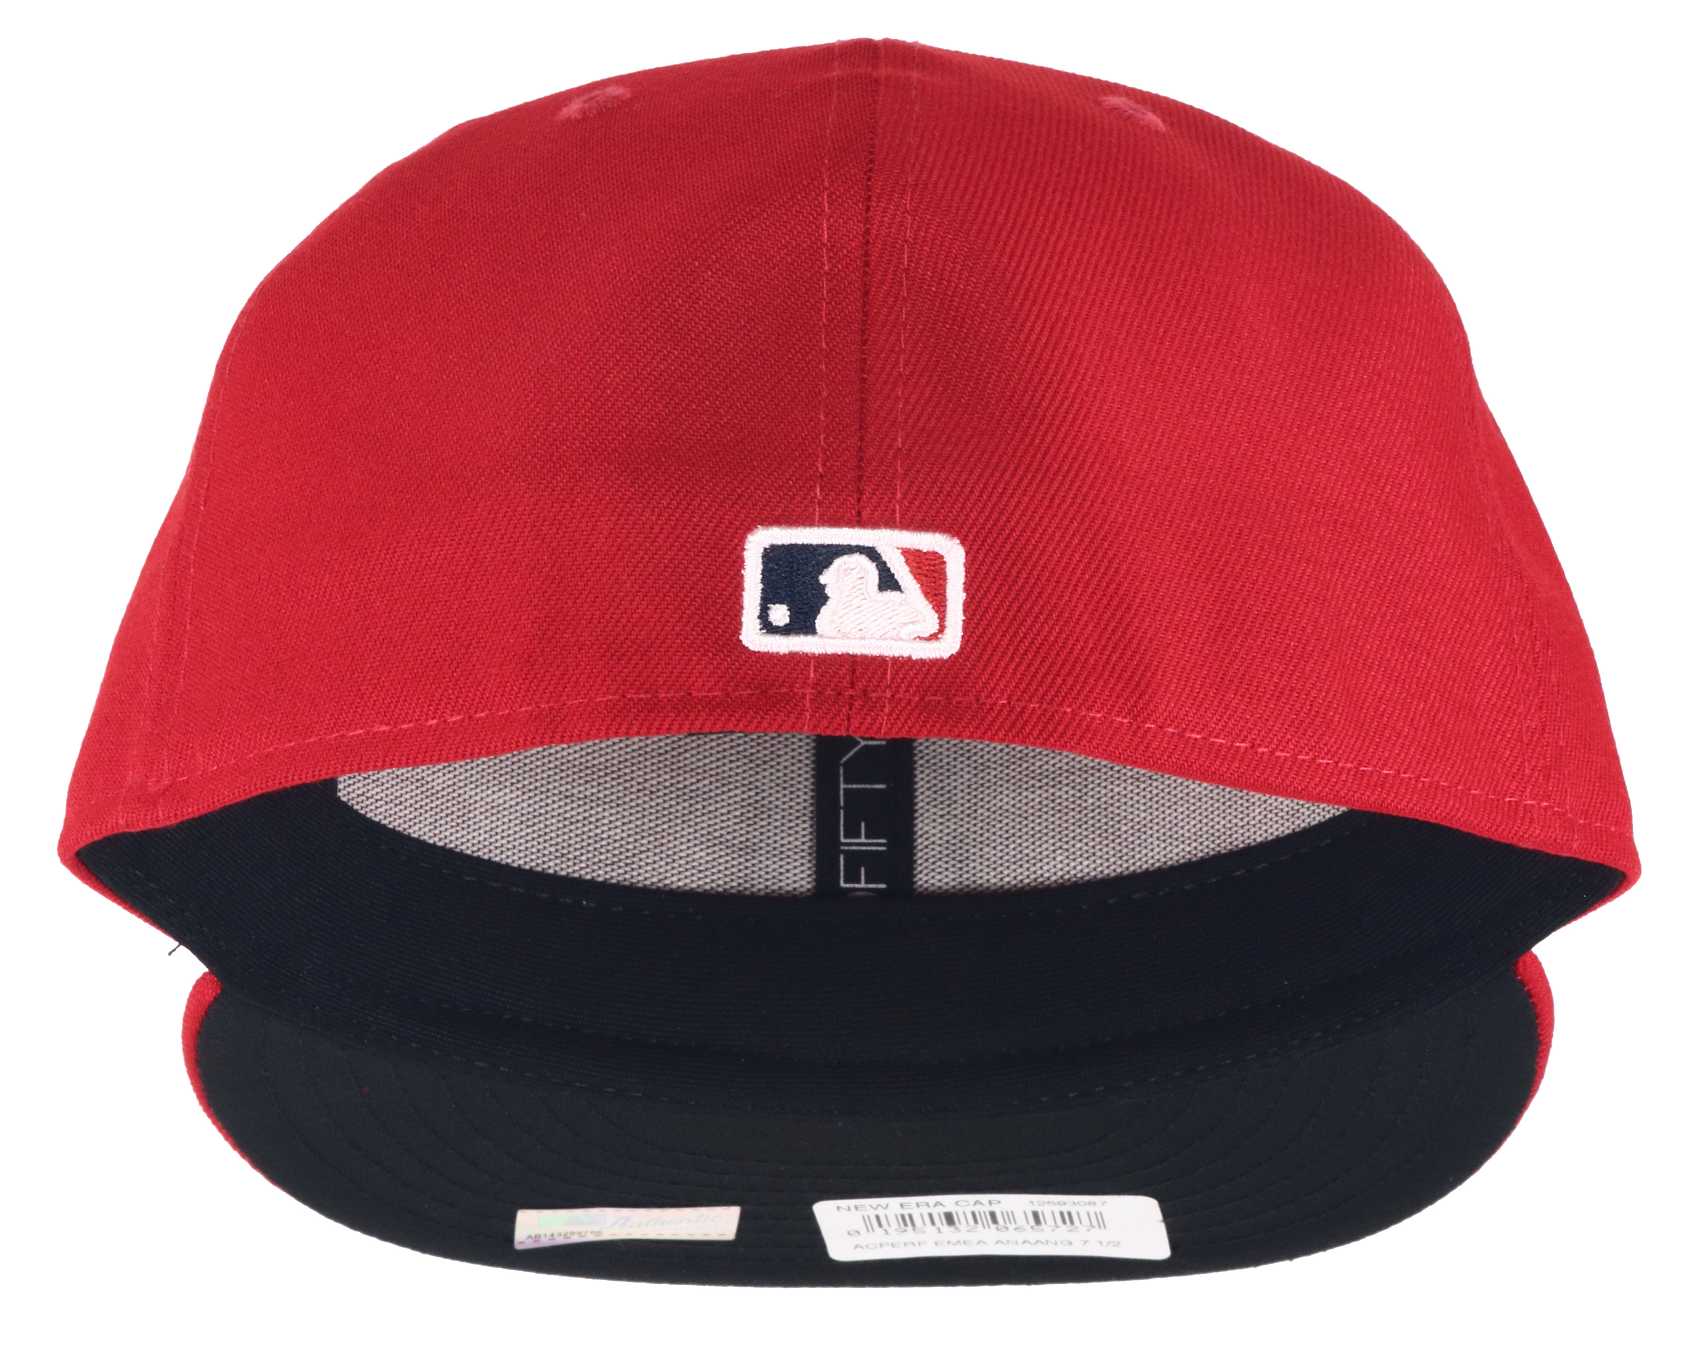 Los Angeles Angels MLB AC Performance Red 59Fifty Basecap New Era